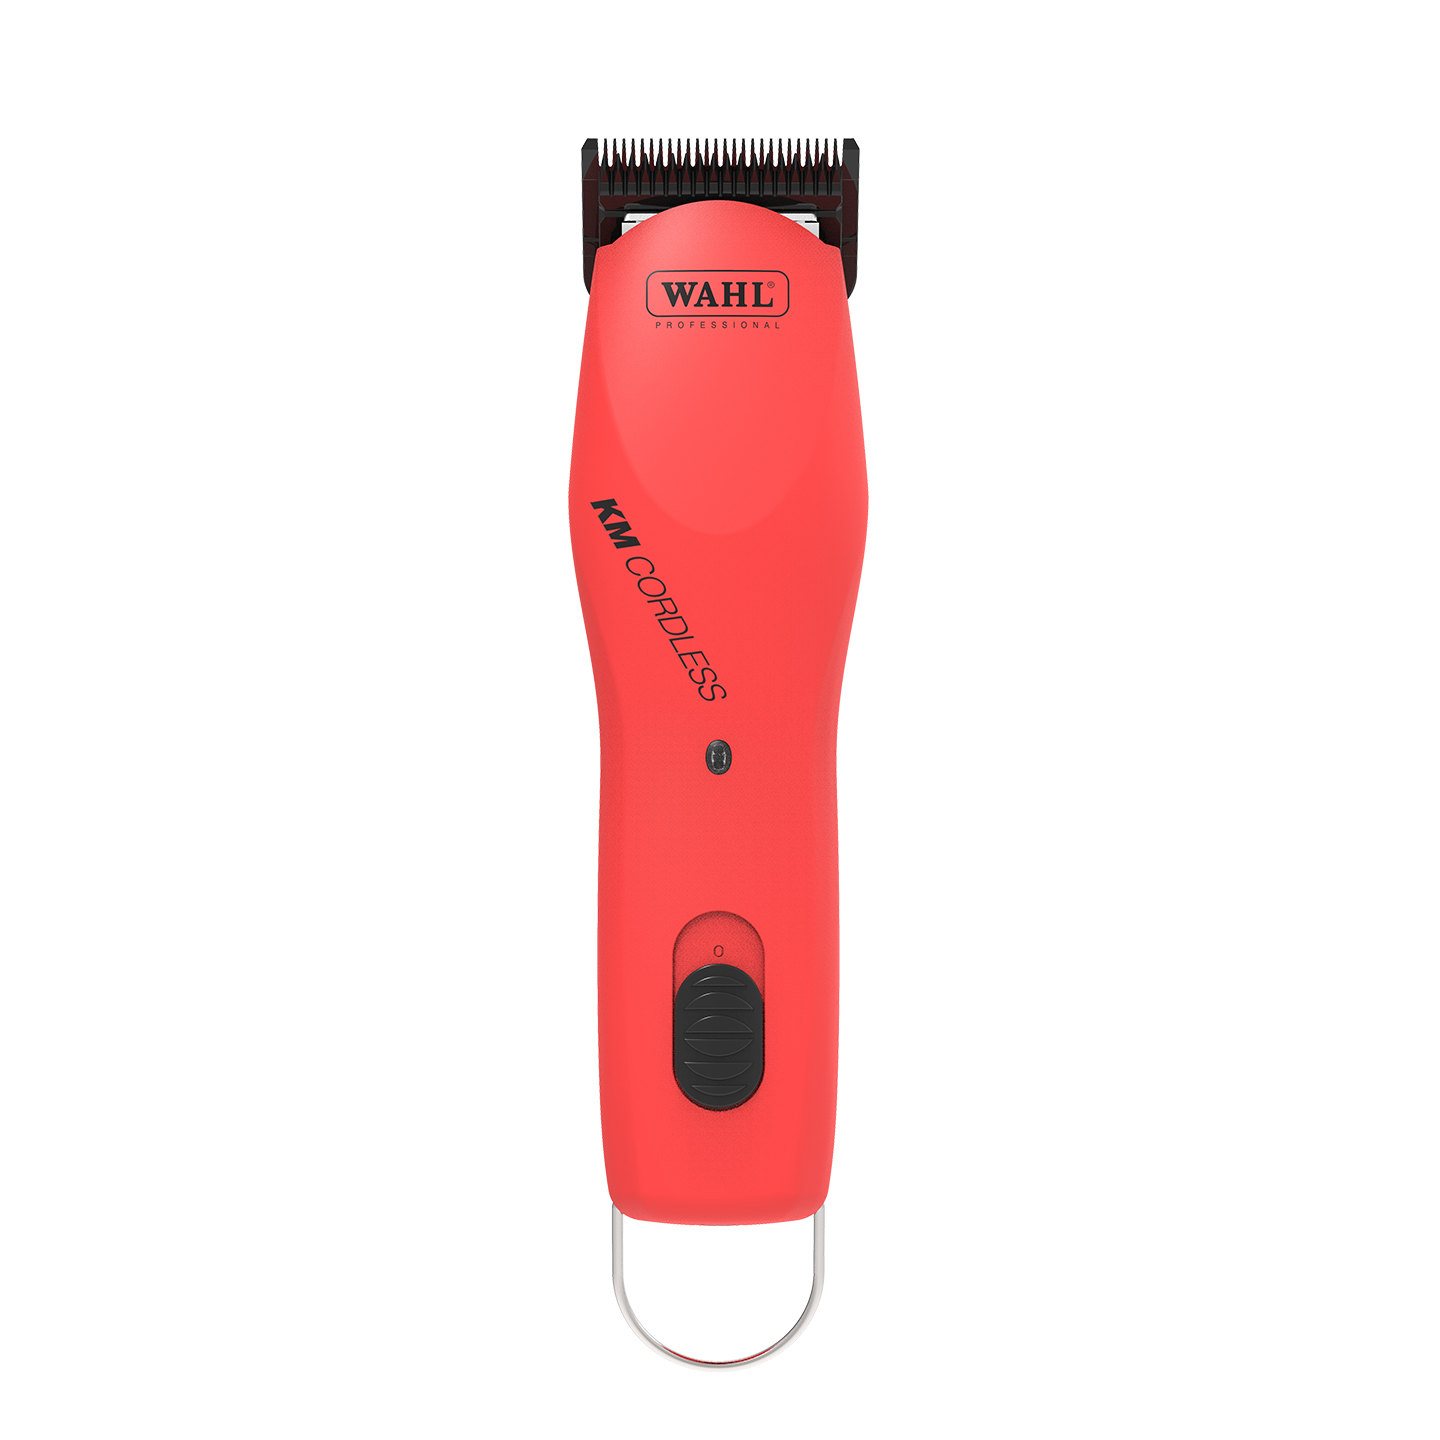 km10 cordless clippers